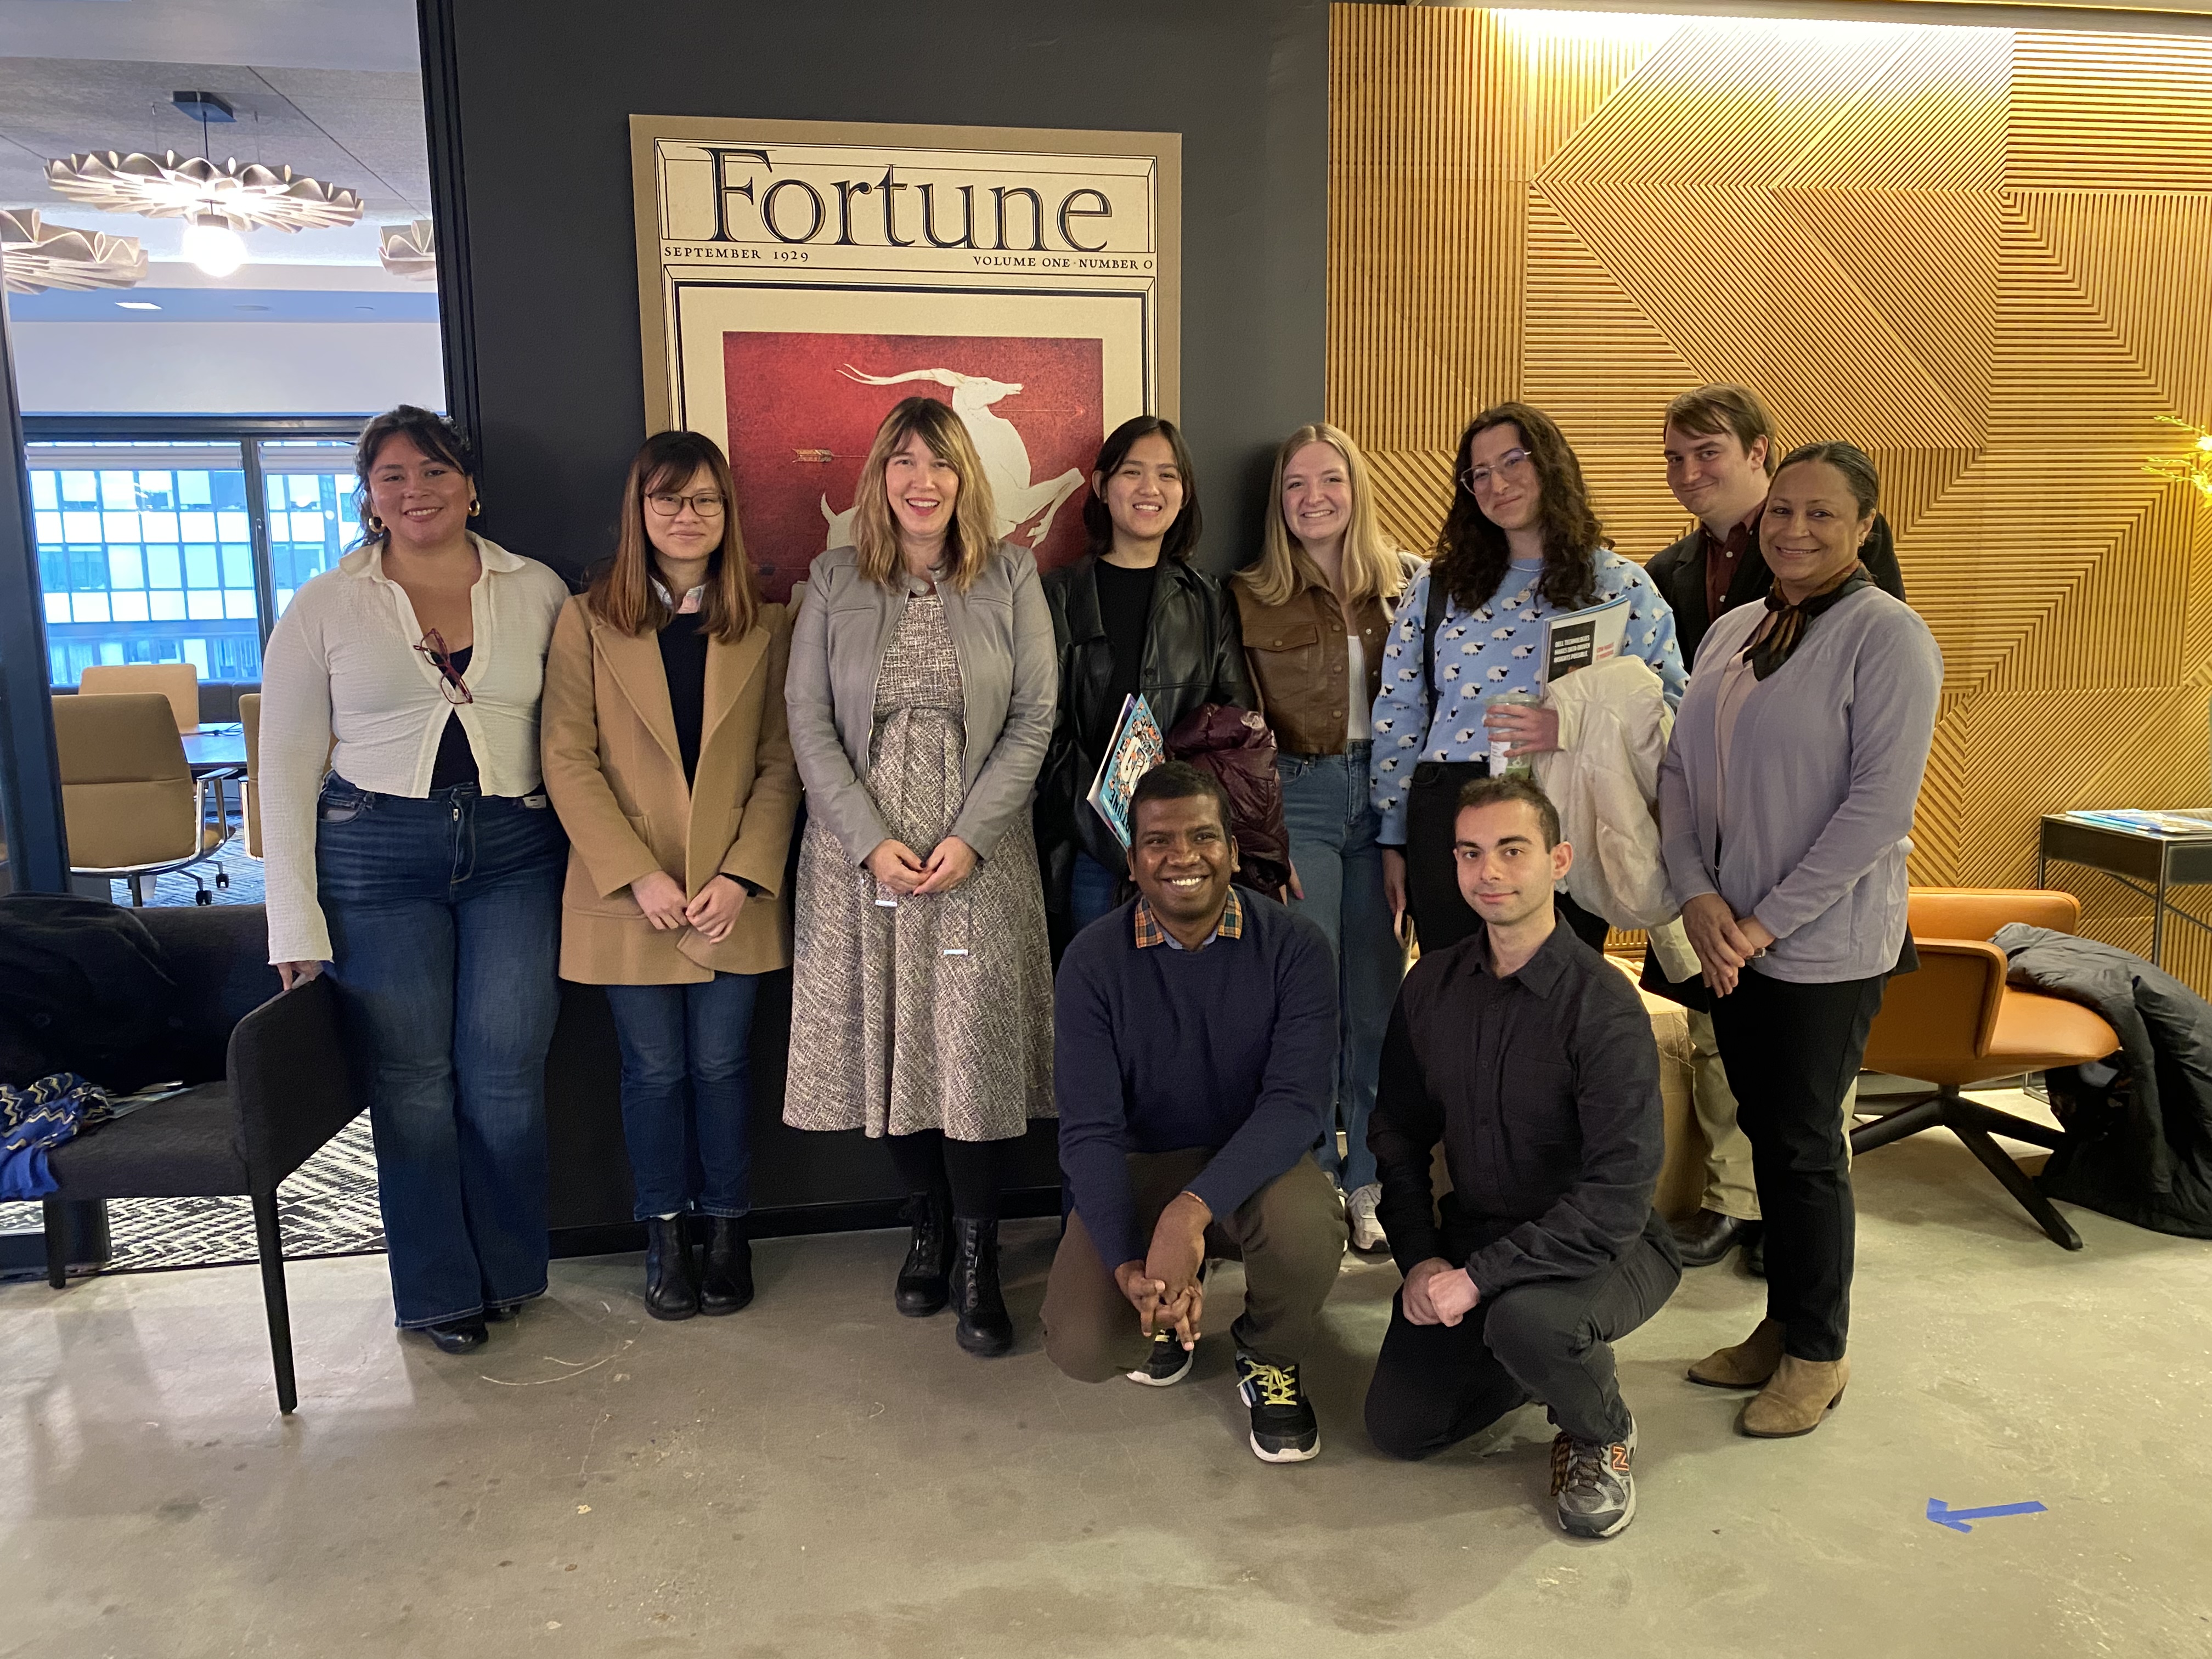 The students post with Megan Gilbert at Fortune Media